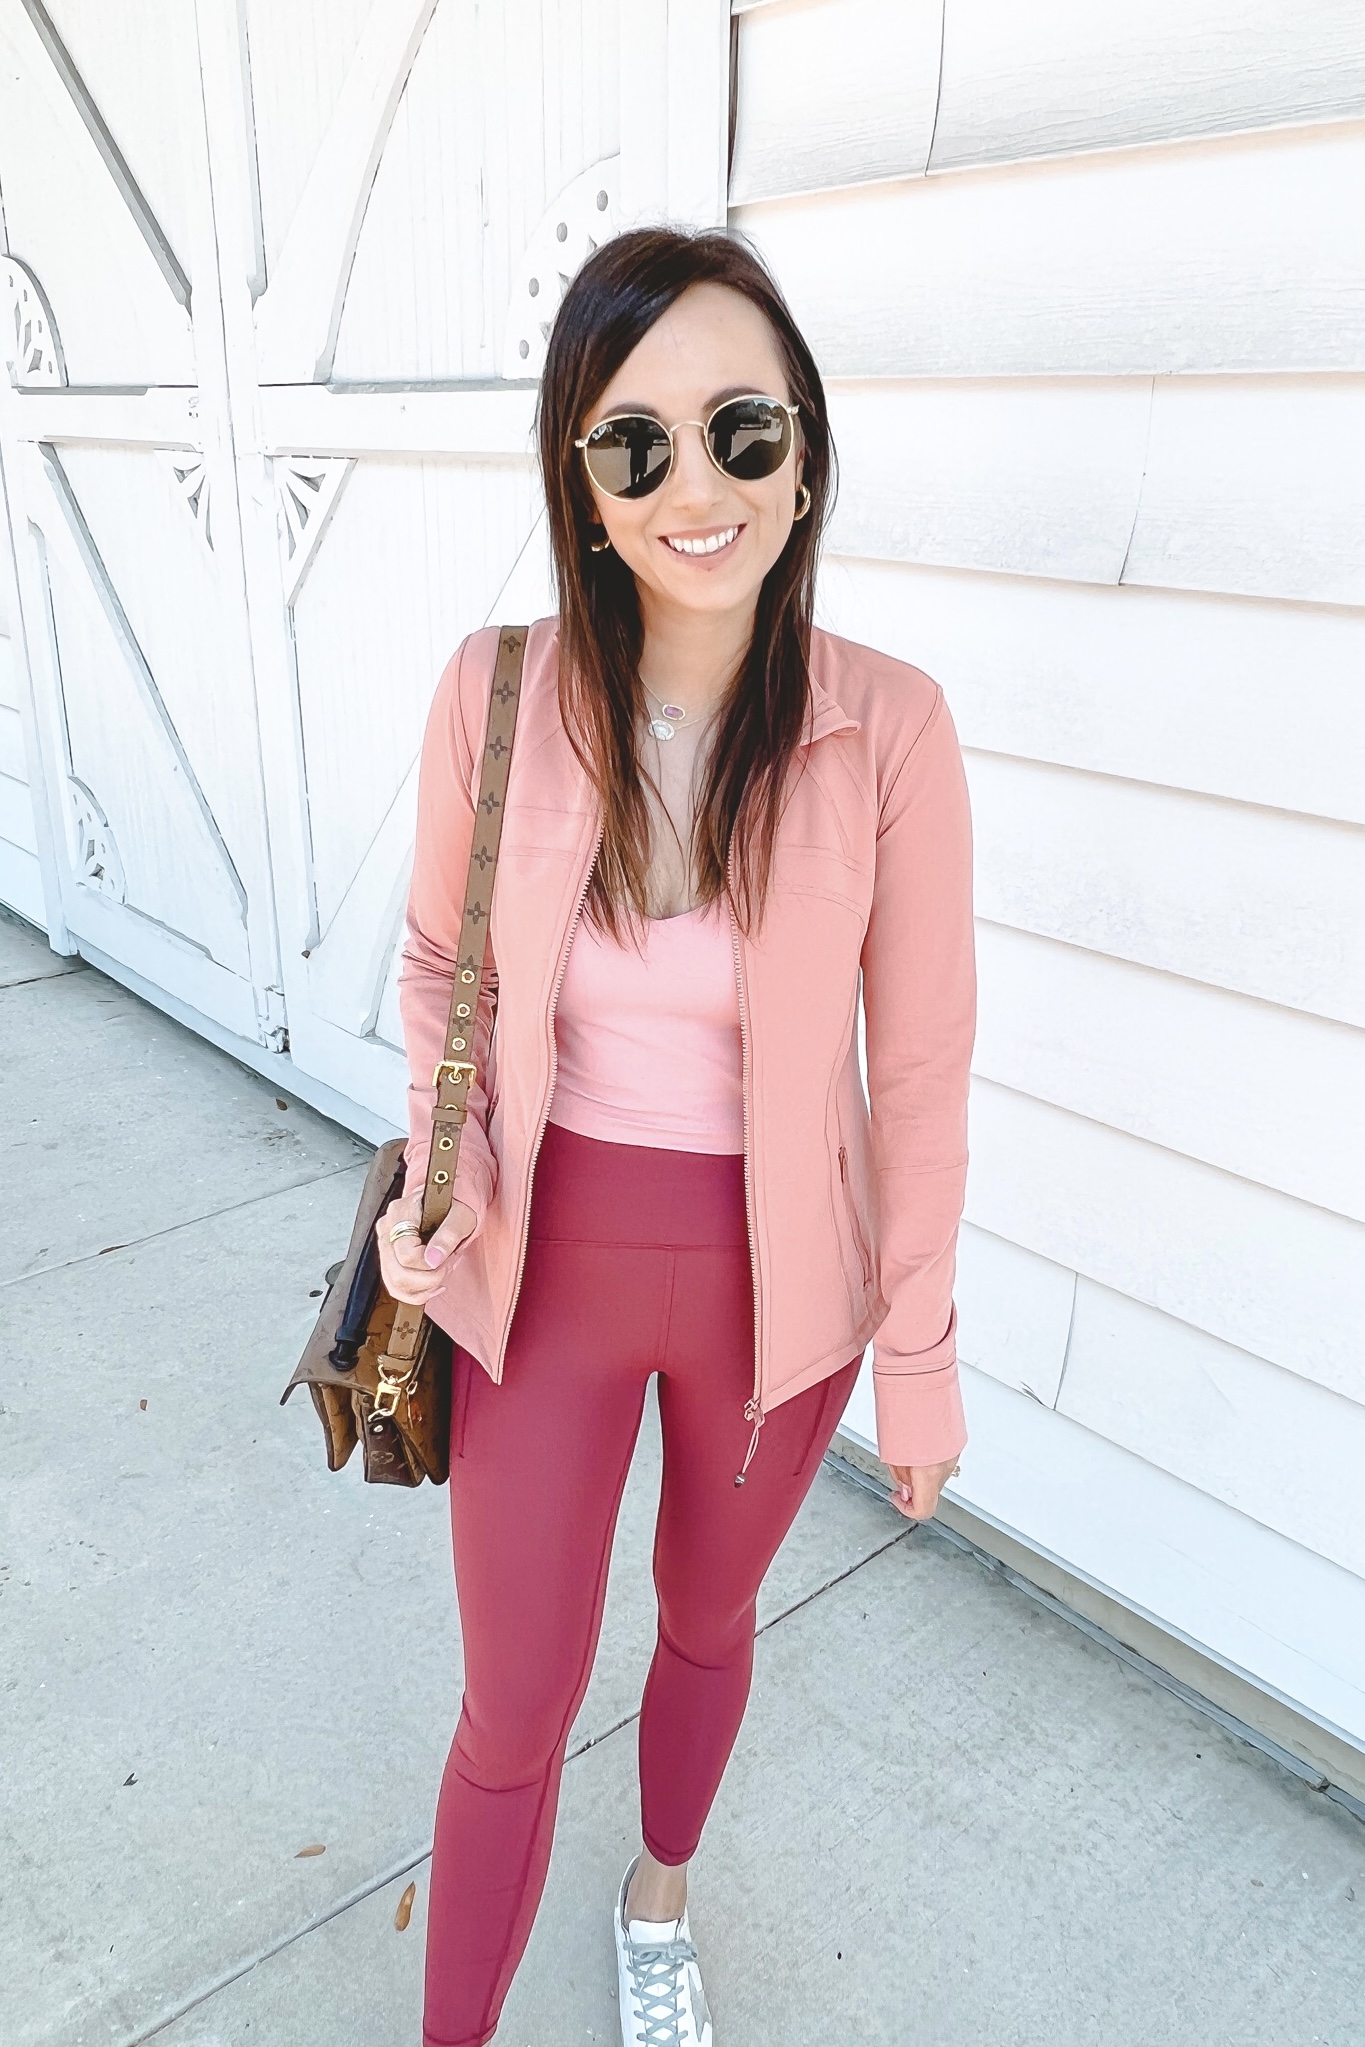 Classic and Flattering Lululemon Outfit